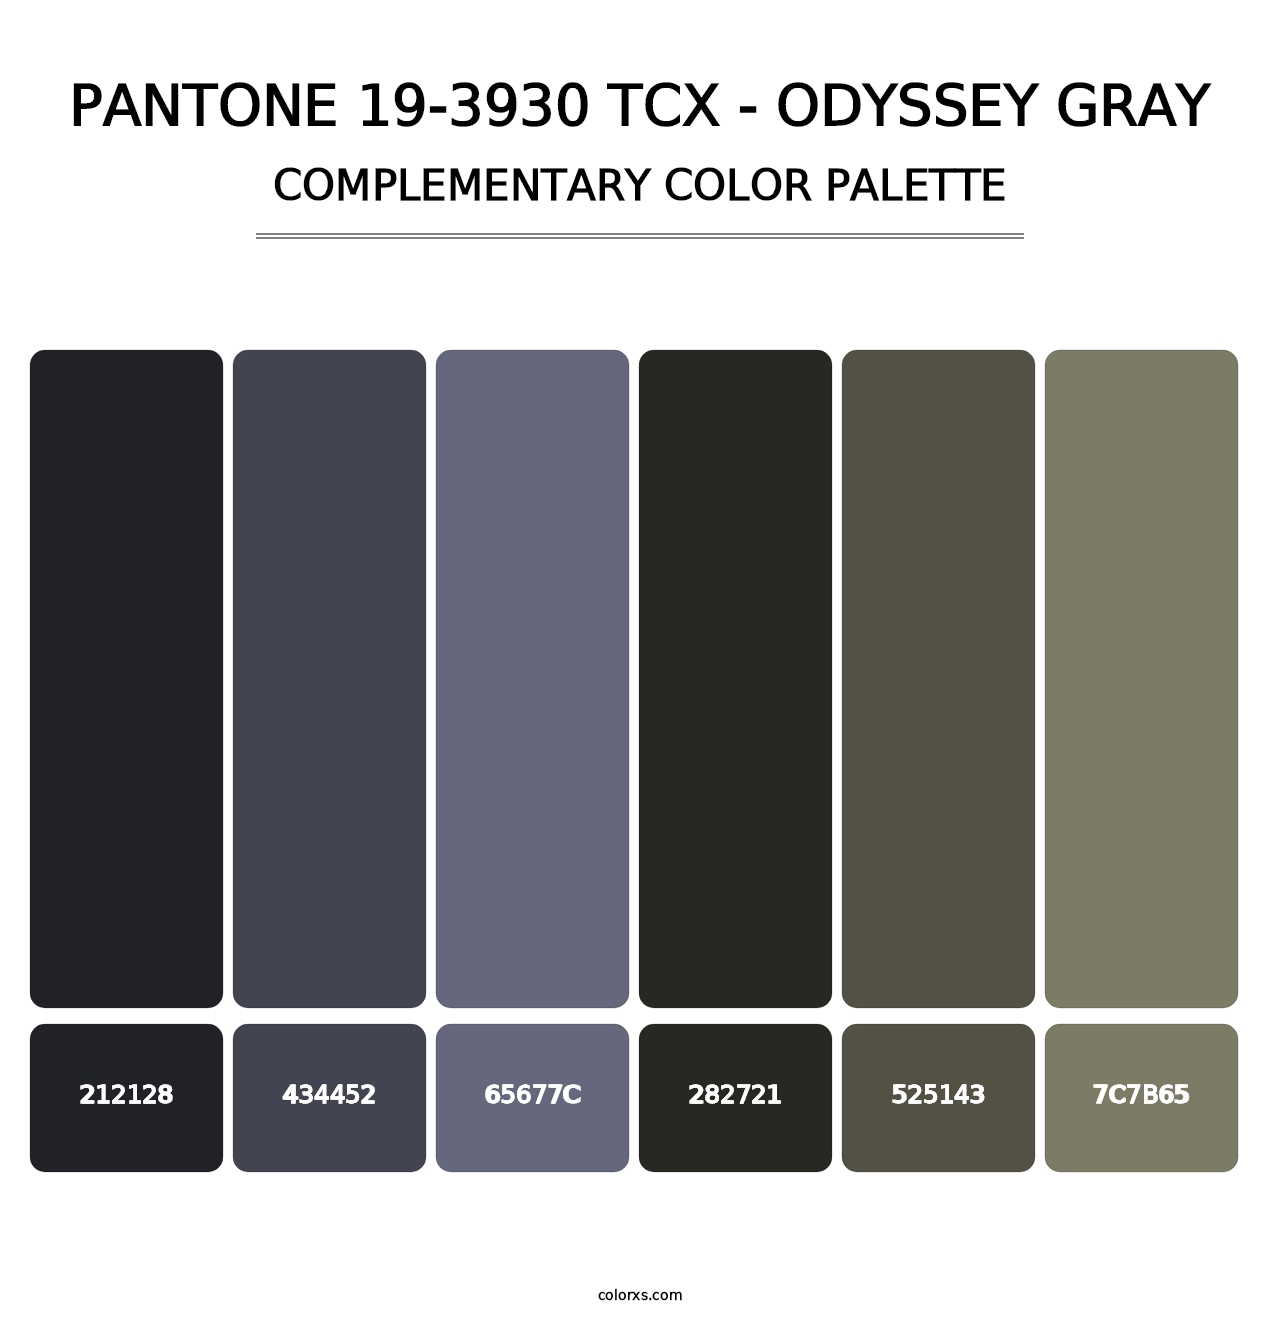 PANTONE 19-3930 TCX - Odyssey Gray - Complementary Color Palette